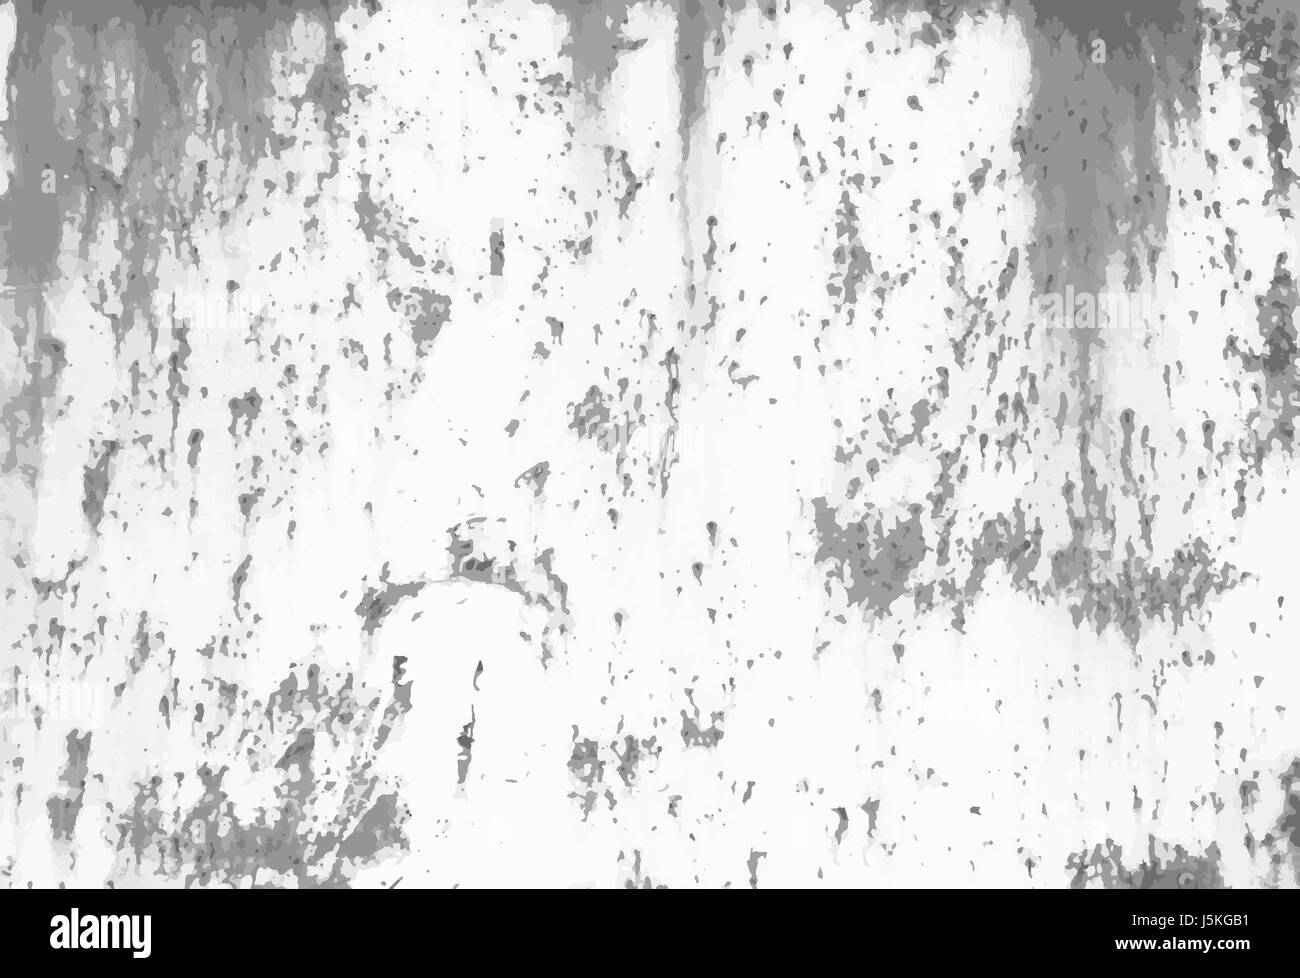 Rusted metal industrial scratched background. Grunge black and white vector texture template for overlay artwork. Stock Vector